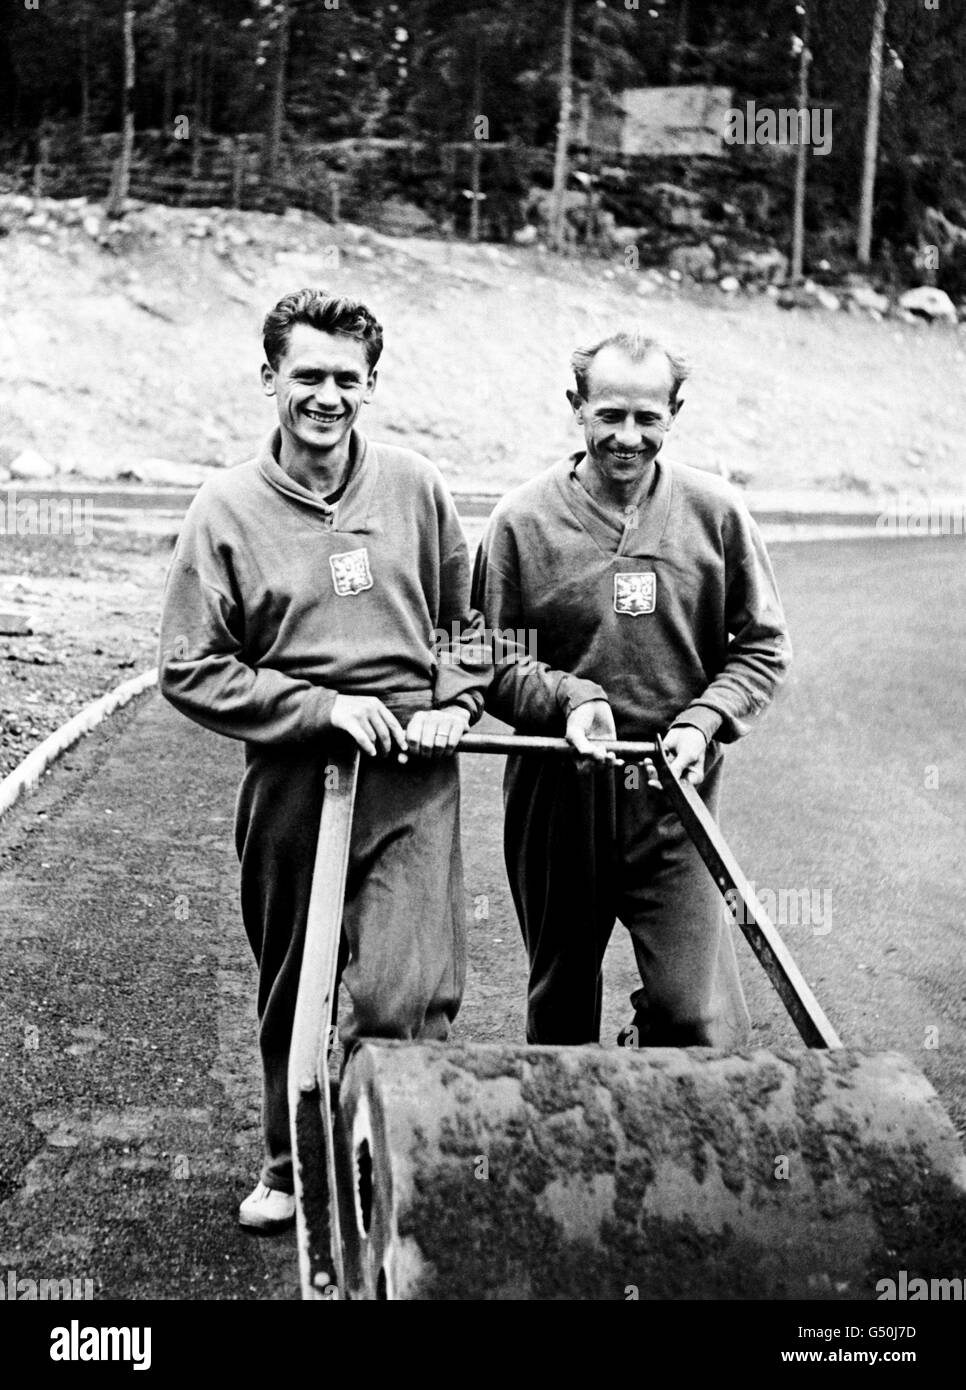 Emil Zatopek, right, the Czech runner, and winner of the 10,000 metres, keeps fit with a turn at the roller, helped by his fellow countryman, Vaclav Cevona, to compete in the 1,500 metres. Stock Photo